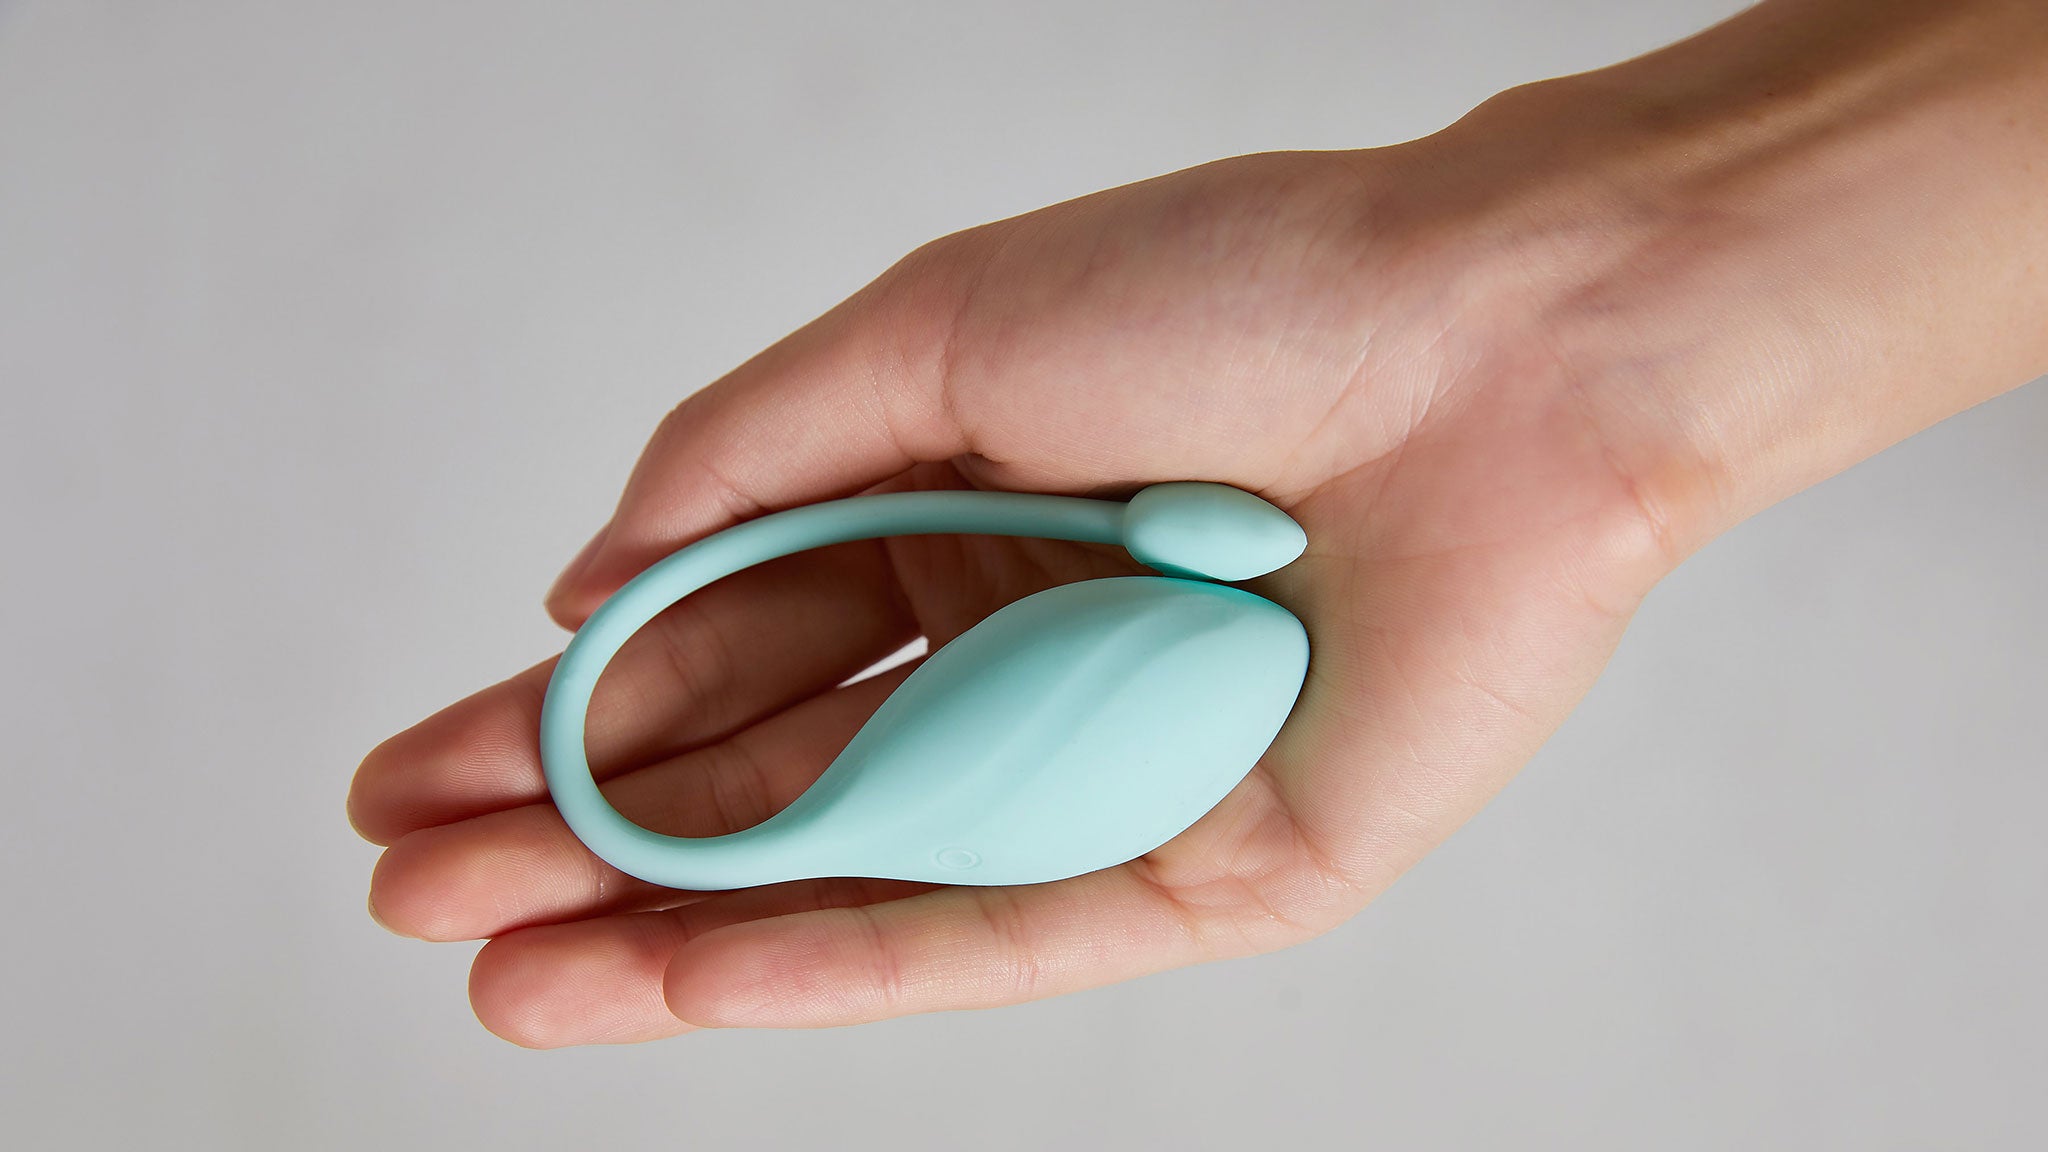 Egg Vibrators: What Are They And How Do You Use Them?